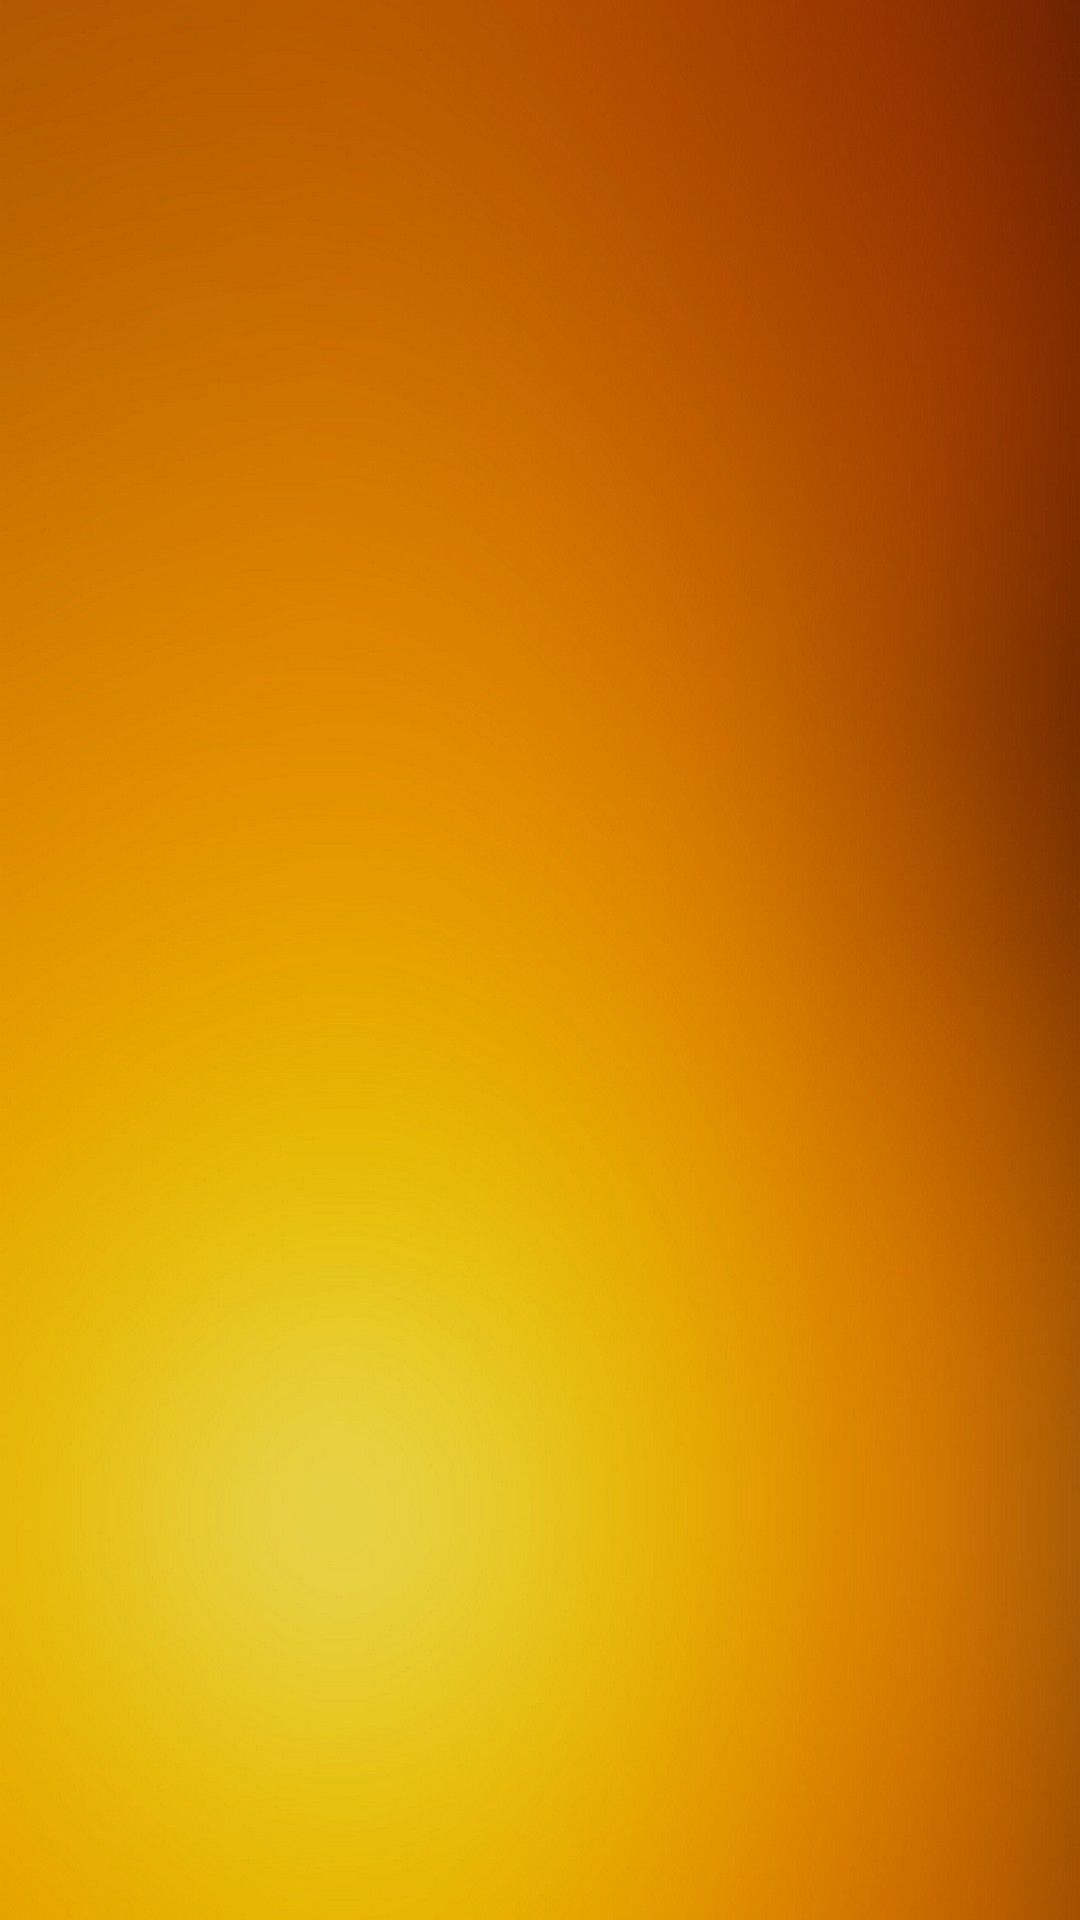 Wallpaper Plain Gold Android Android Wallpaper